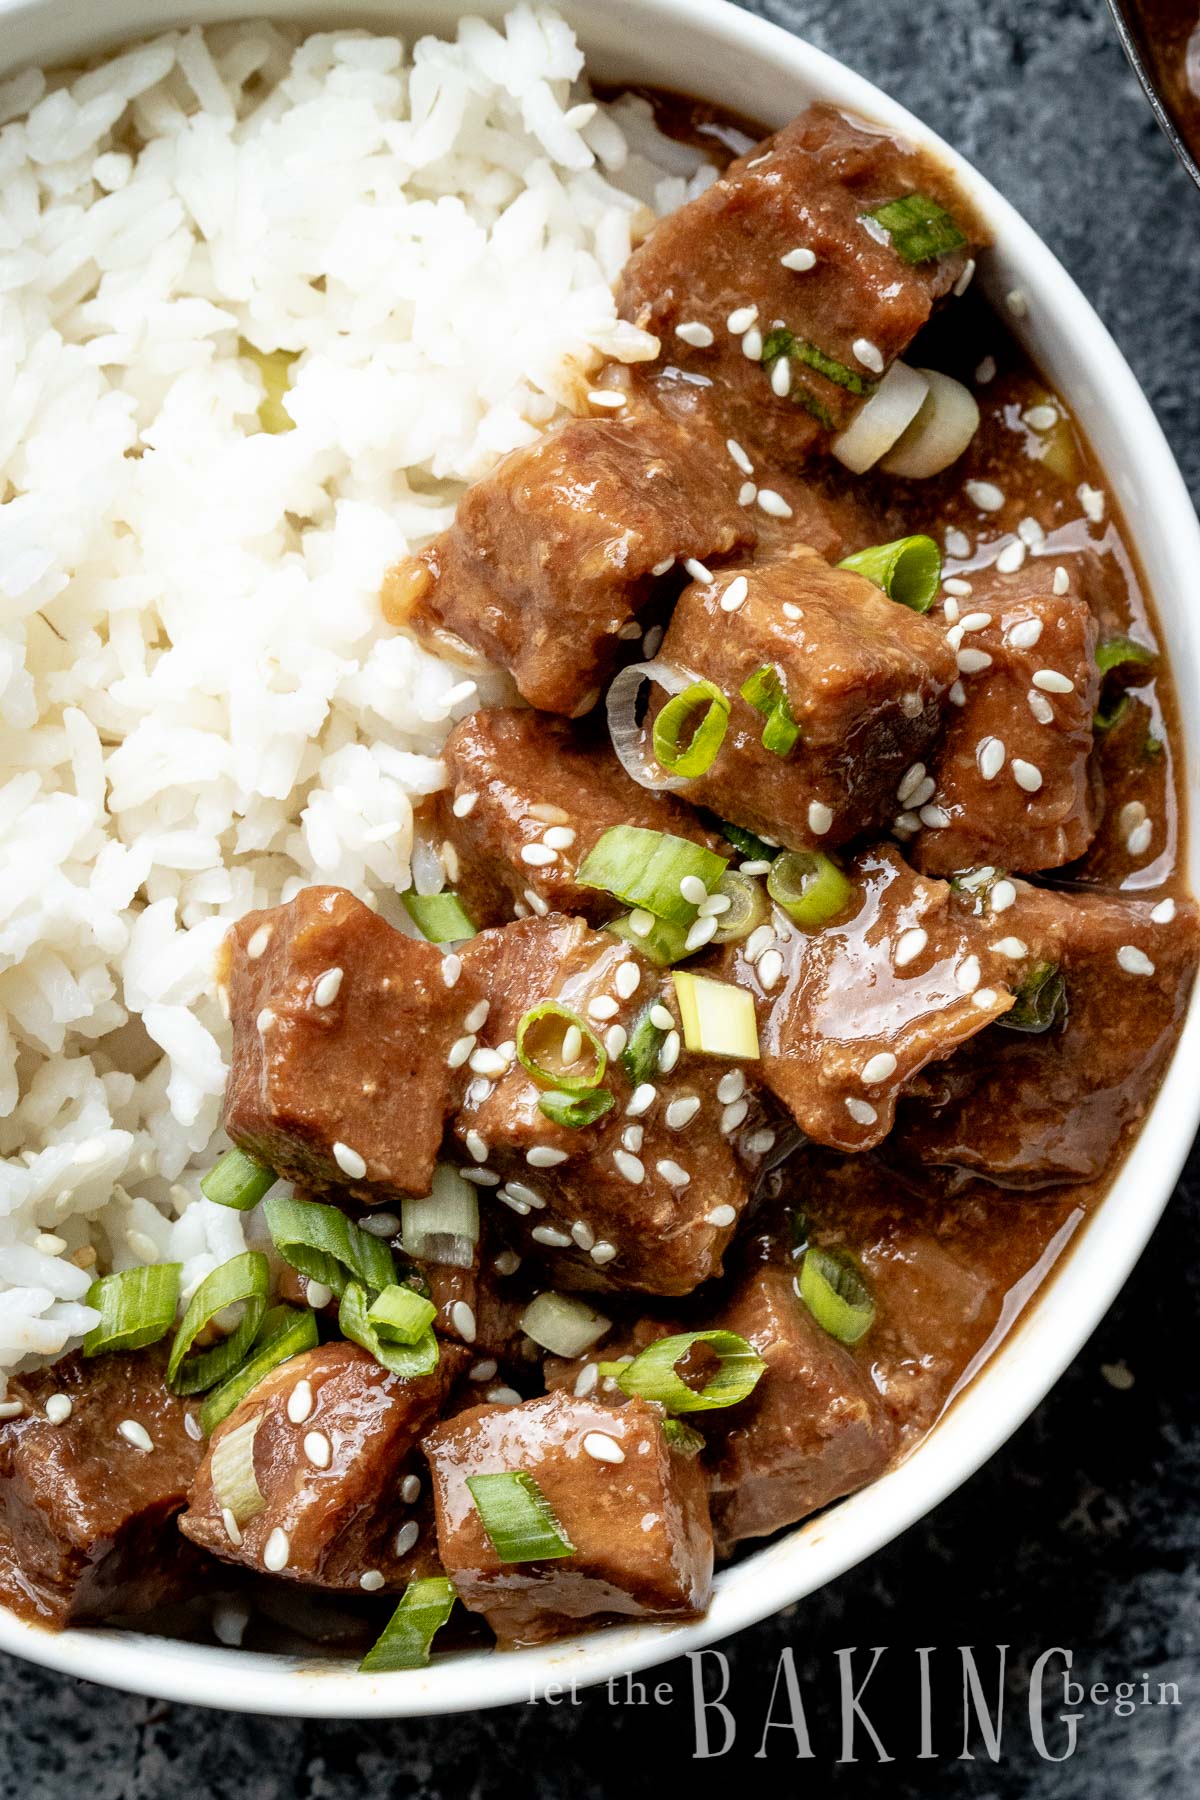 Instant Pot Korean Beef and Rice is perfect for a busy weeknight dinner. The notes of ginger and garlic give this tender beef recipe that Asian flavor flare that my family absolutely loves! Forget takeout and make this at home instead!